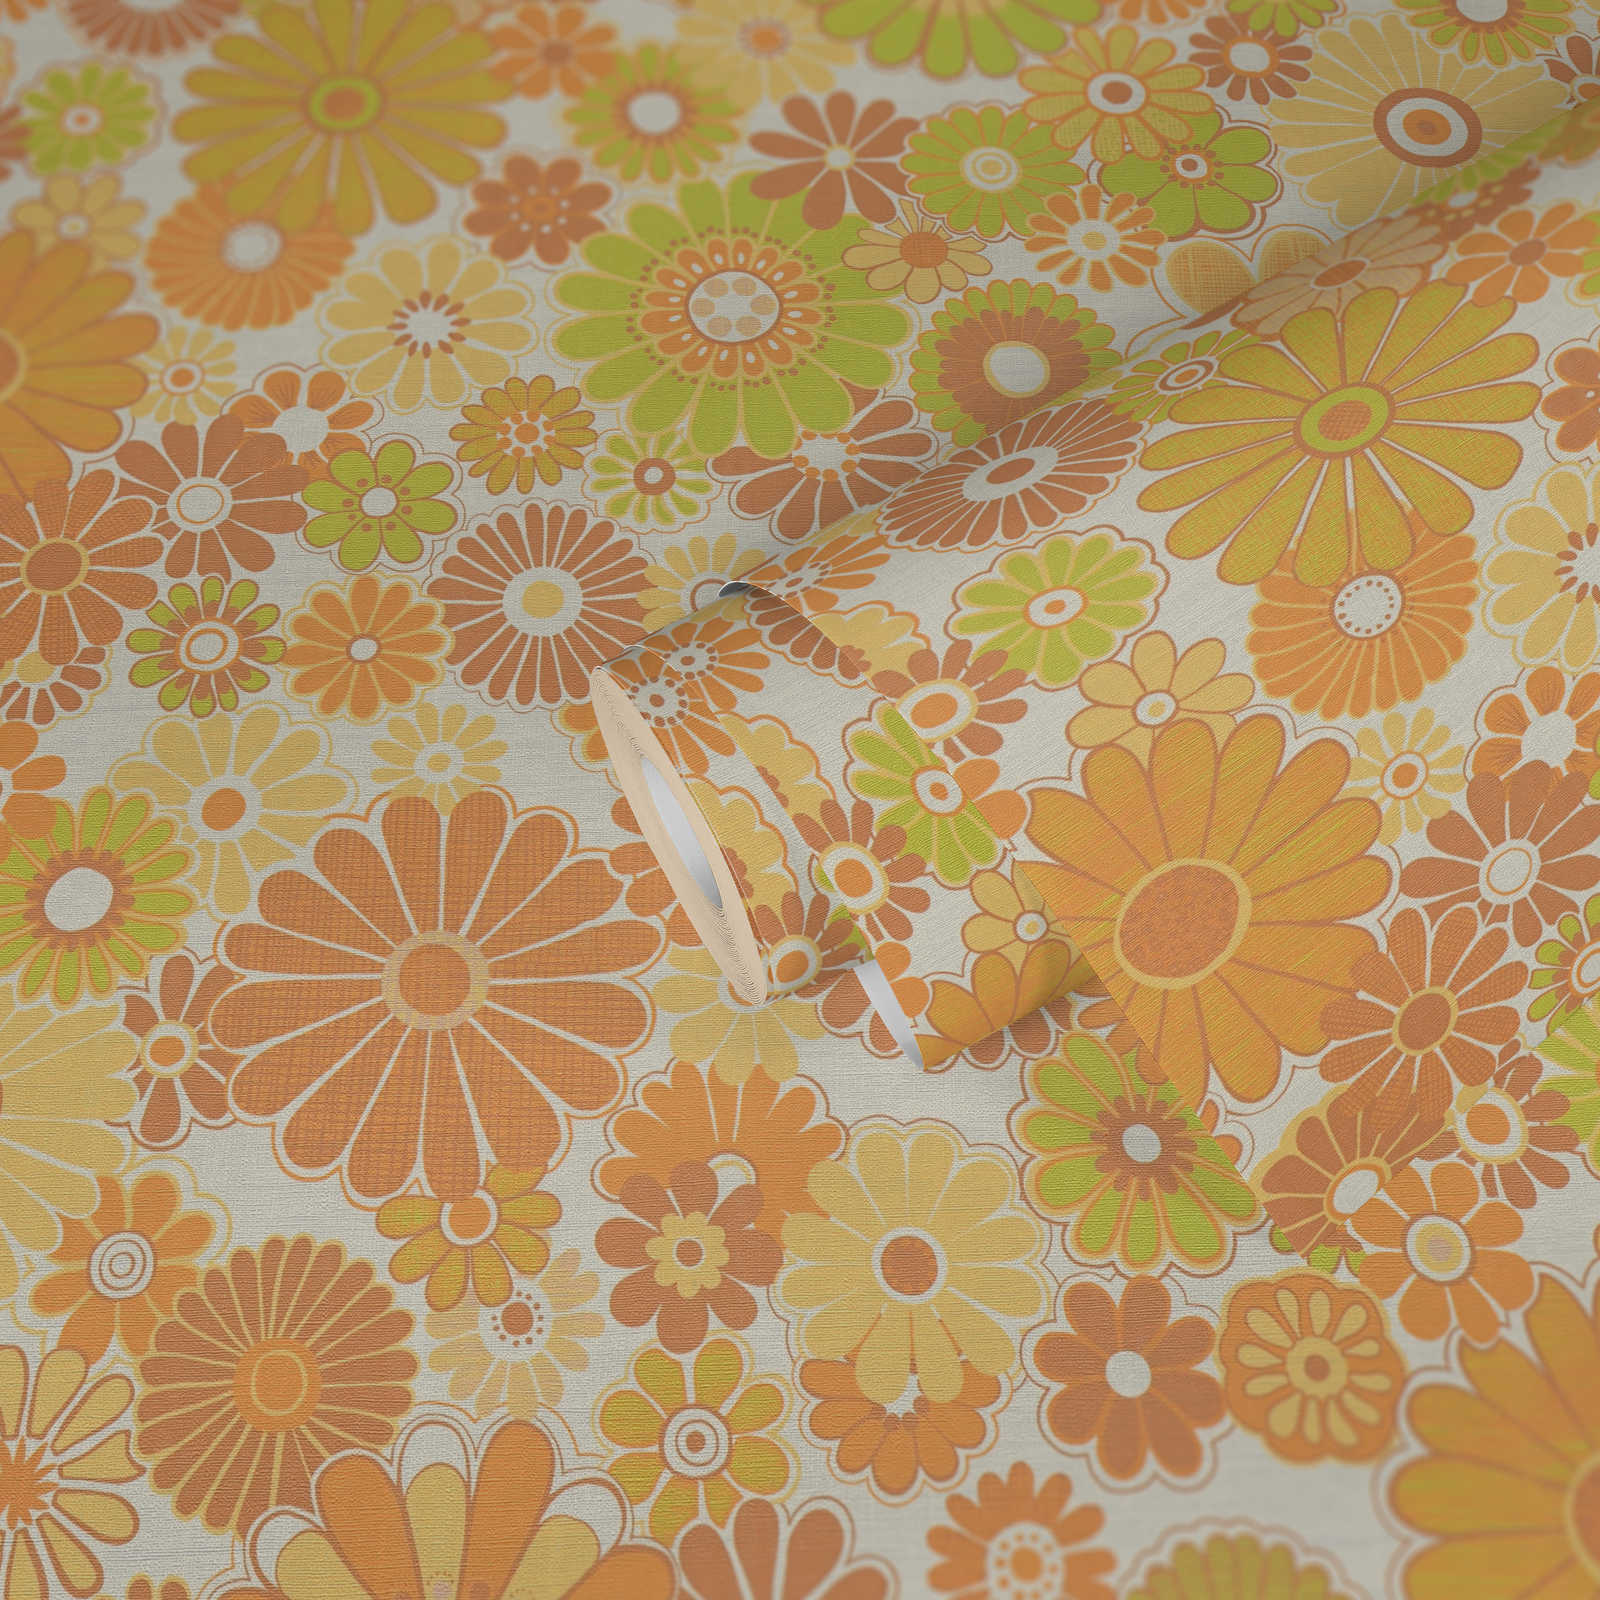             Floral retro wallpaper with light structure - yellow, green, brown
        